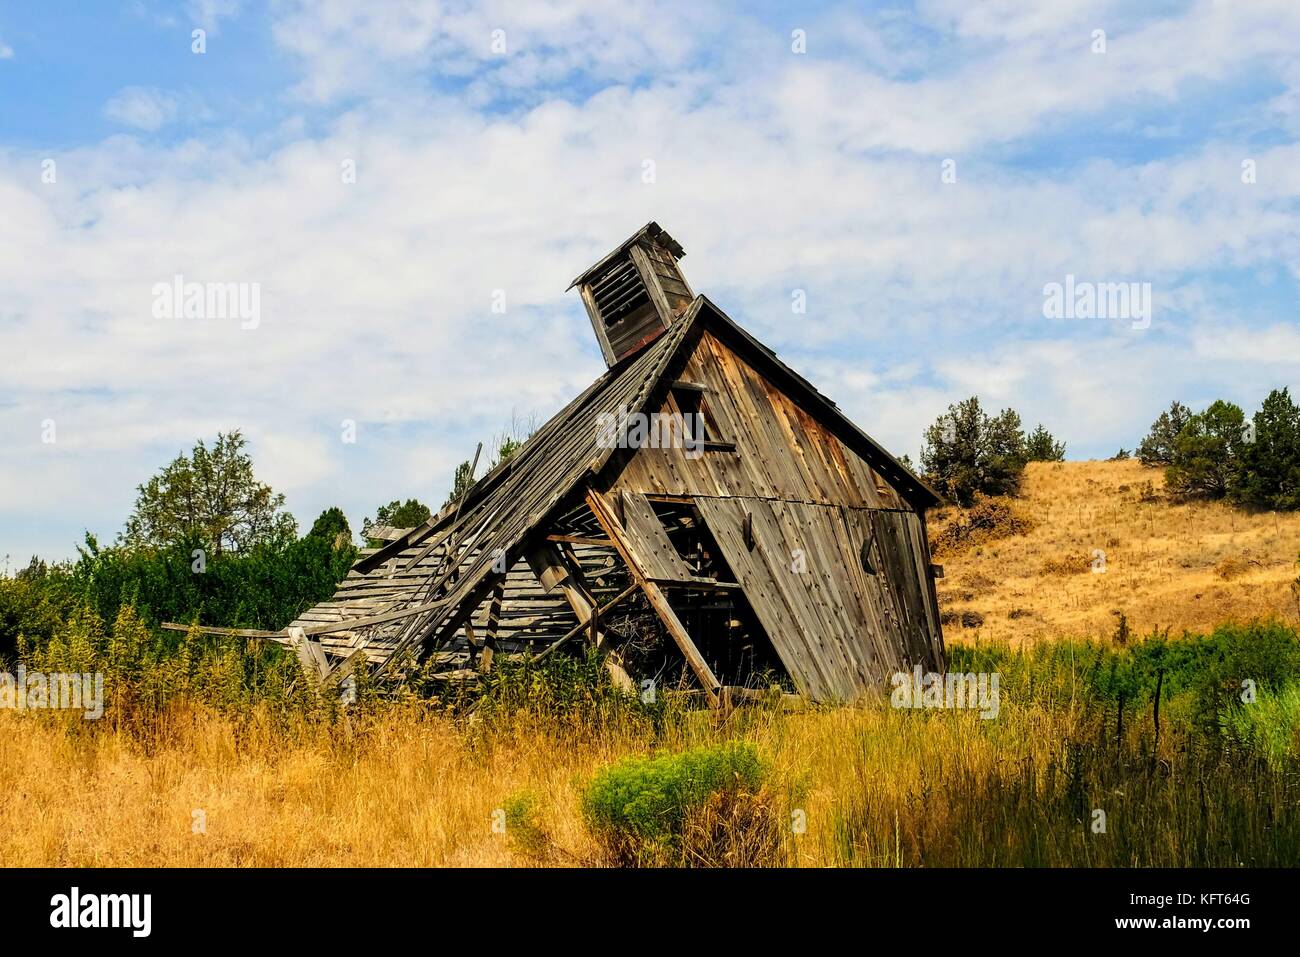 The last remnant of the 'Cross Hollow' stagecoach stop near Shaniko,Oregon Stock Photo